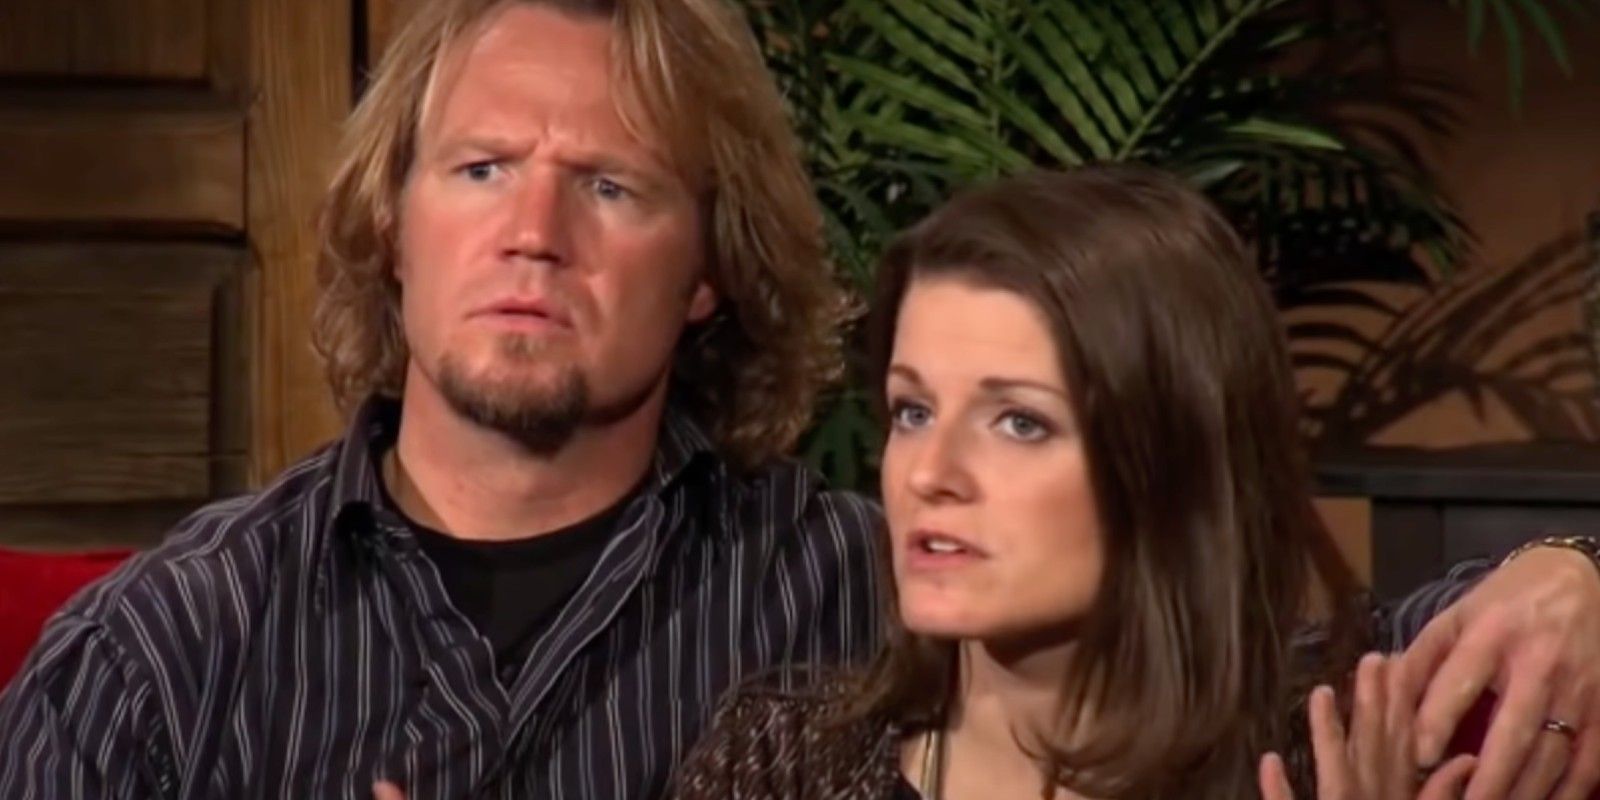 Kody and Robyn Brown from Sister Wives with serious expressions